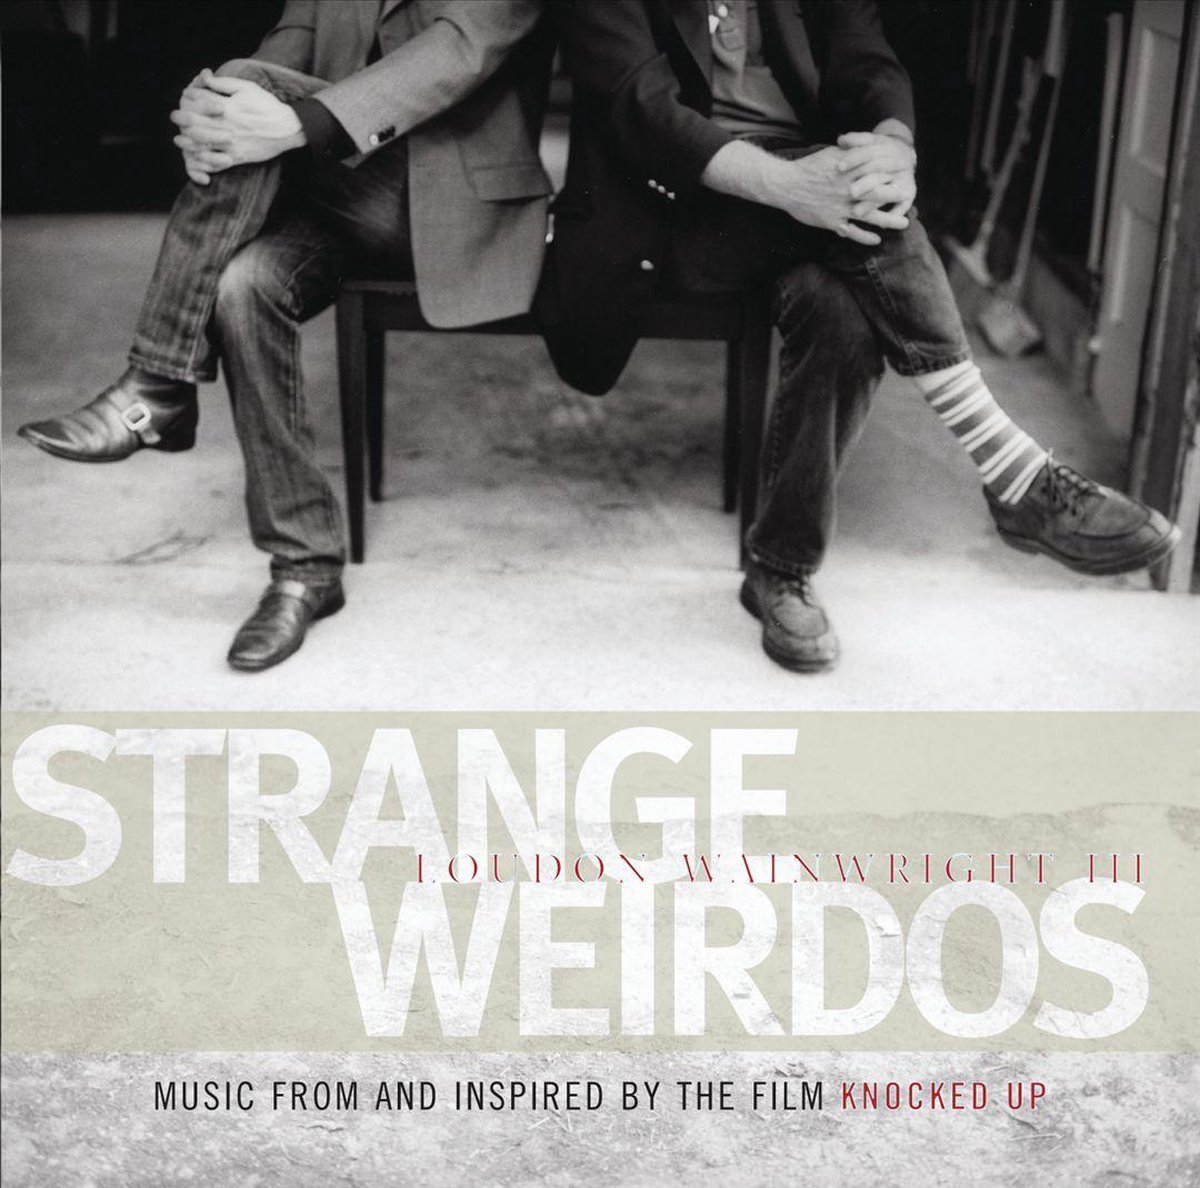 Strange Weirdos (Music From And Inspired By The Film Knocked Up) - Loudon Wainwright Iii